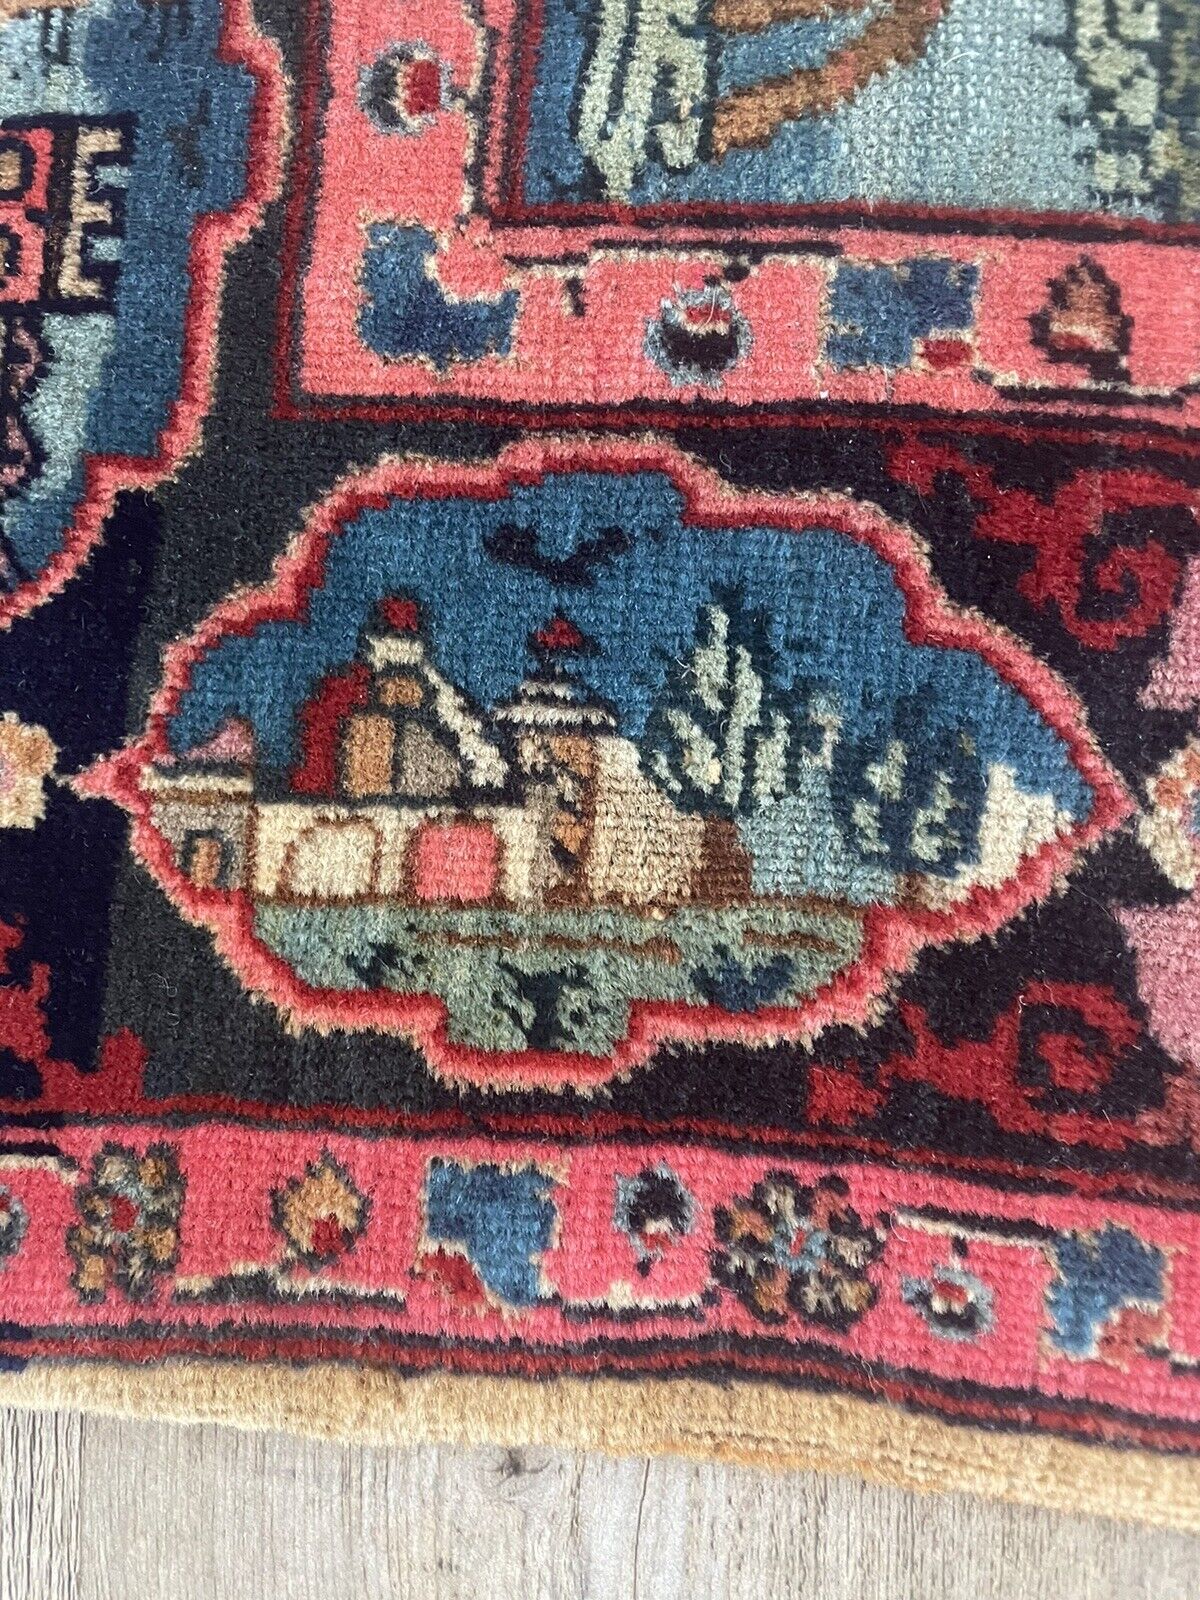 Close-up of value on Handmade Antique Persian Kashan Collectible Rug - Detailed view emphasizing the rug's value as a unique and historical artifact, appreciated by collectors and enthusiasts alike.